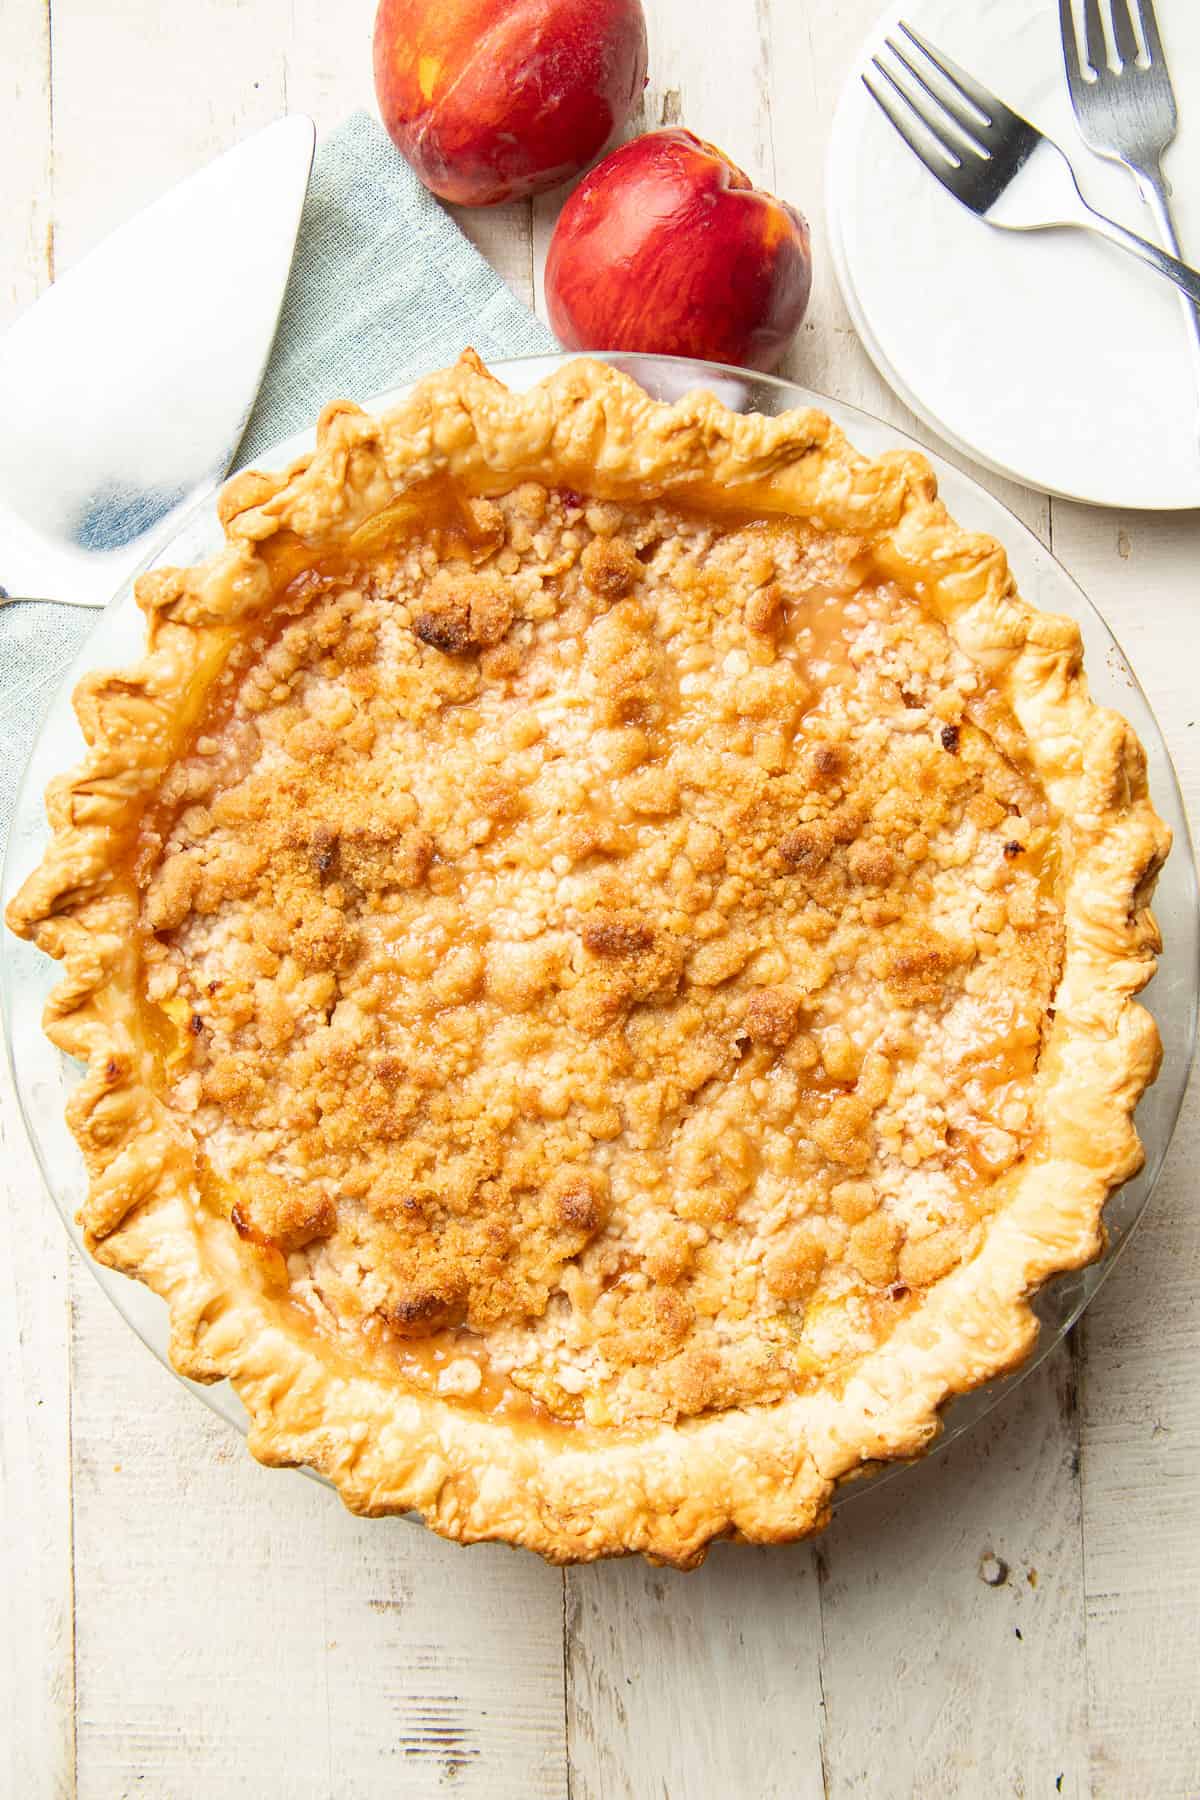 Whole Vegan Peach Pie on a white wooden surface with peaches, dishes, forks and pie server.